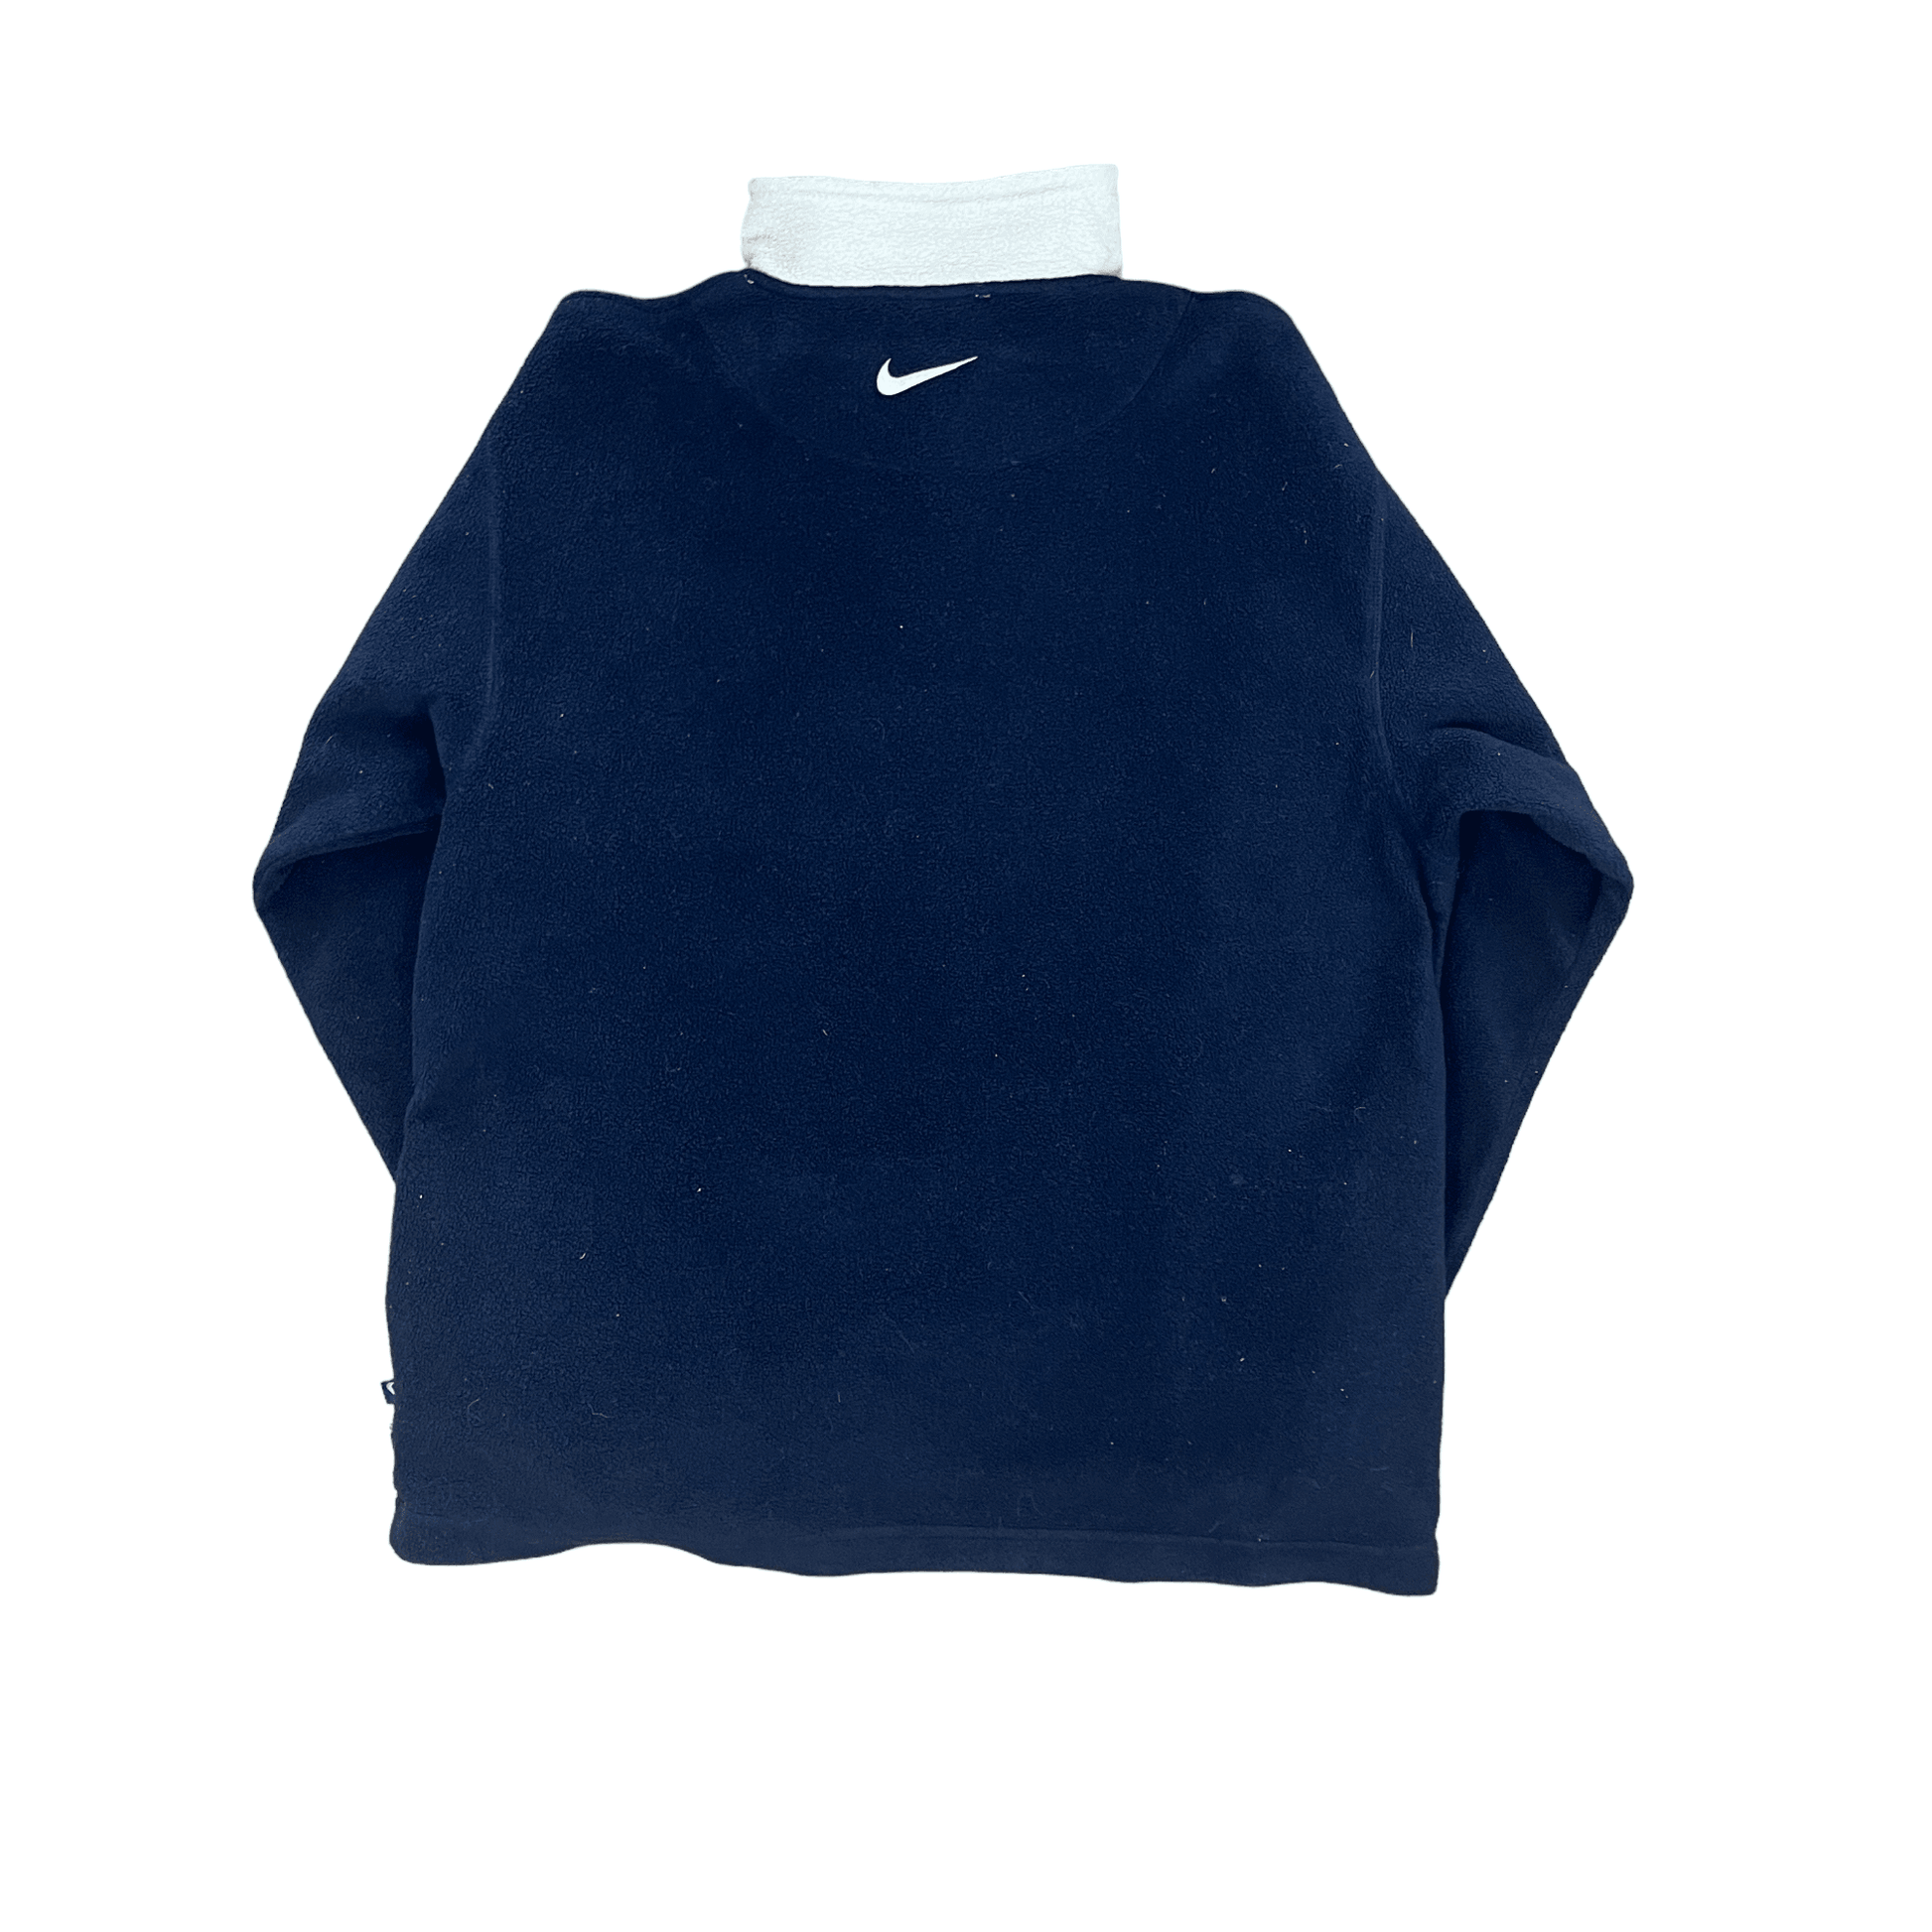 Vintage 90s Navy Blue + Grey Nike Centre Logo Quarter Zip Fleece - Recommended Size - Extra Large - The Streetwear Studio